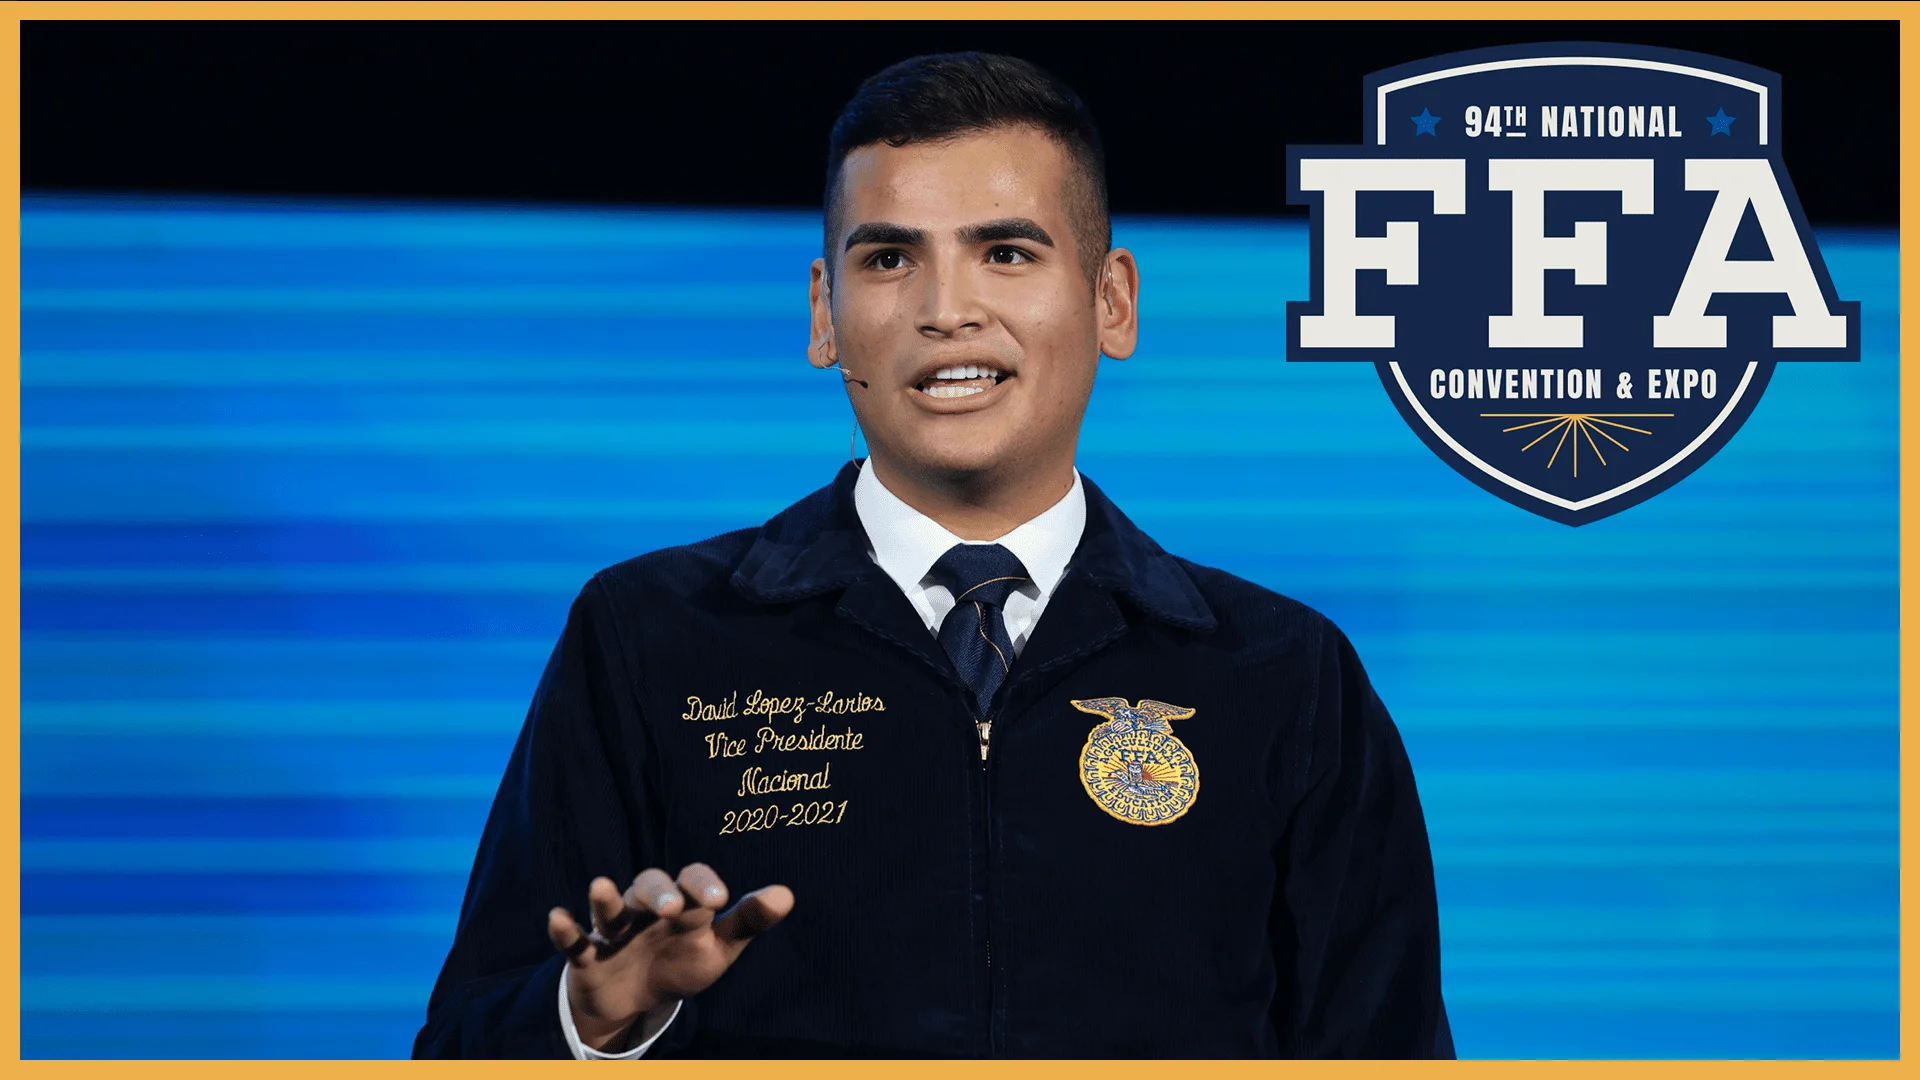 What Does FFA Stand For? on Vimeo